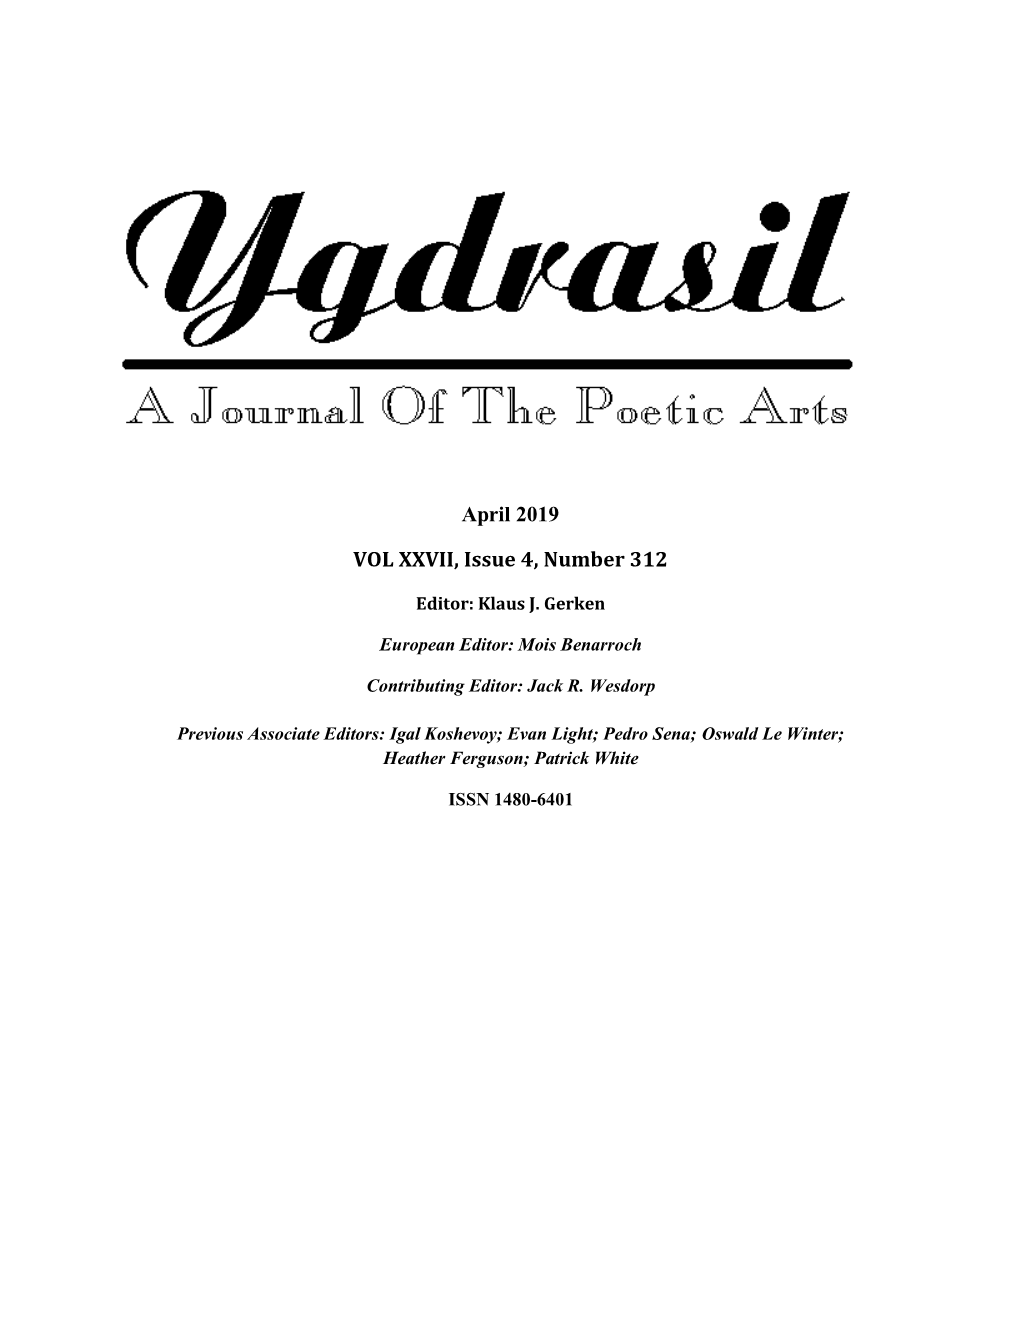 April 2019 VOL XXVII, Issue 4, Number